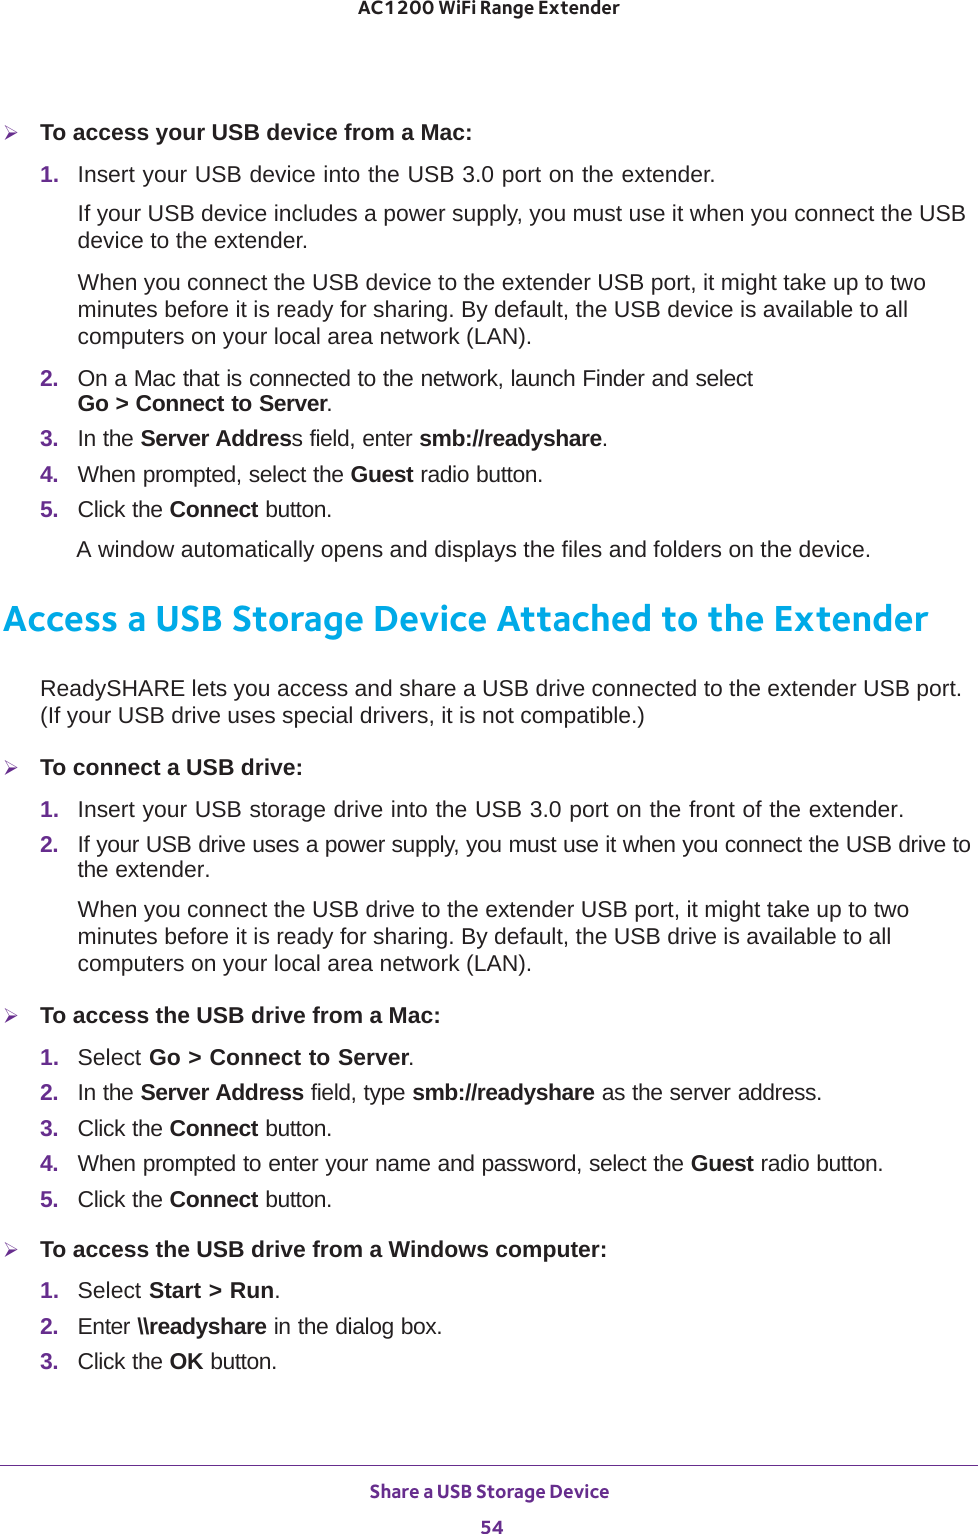 Share a USB Storage Device 54AC1200 WiFi Range Extender To access your USB device from a Mac:1.  Insert your USB device into the USB 3.0 port on the extender.If your USB device includes a power supply, you must use it when you connect the USB device to the extender.When you connect the USB device to the extender USB port, it might take up to two minutes before it is ready for sharing. By default, the USB device is available to all computers on your local area network (LAN).2.  On a Mac that is connected to the network, launch Finder and select  Go &gt; Connect to Server.3.  In the Server Address field, enter smb://readyshare.4.  When prompted, select the Guest radio button.5.  Click the Connect button.A window automatically opens and displays the files and folders on the device.Access a USB Storage Device Attached to the ExtenderReadySHARE lets you access and share a USB drive connected to the extender USB port. (If your USB drive uses special drivers, it is not compatible.)To connect a USB drive:1.  Insert your USB storage drive into the USB 3.0 port on the front of the extender.2.  If your USB drive uses a power supply, you must use it when you connect the USB drive to the extender.When you connect the USB drive to the extender USB port, it might take up to two minutes before it is ready for sharing. By default, the USB drive is available to all computers on your local area network (LAN).To access the USB drive from a Mac:1.  Select Go &gt; Connect to Server.2.  In the Server Address field, type smb://readyshare as the server address.3.  Click the Connect button.4.  When prompted to enter your name and password, select the Guest radio button.5.  Click the Connect button.To access the USB drive from a Windows computer: 1.  Select Start &gt; Run.2.  Enter \\readyshare in the dialog box.3.  Click the OK button.